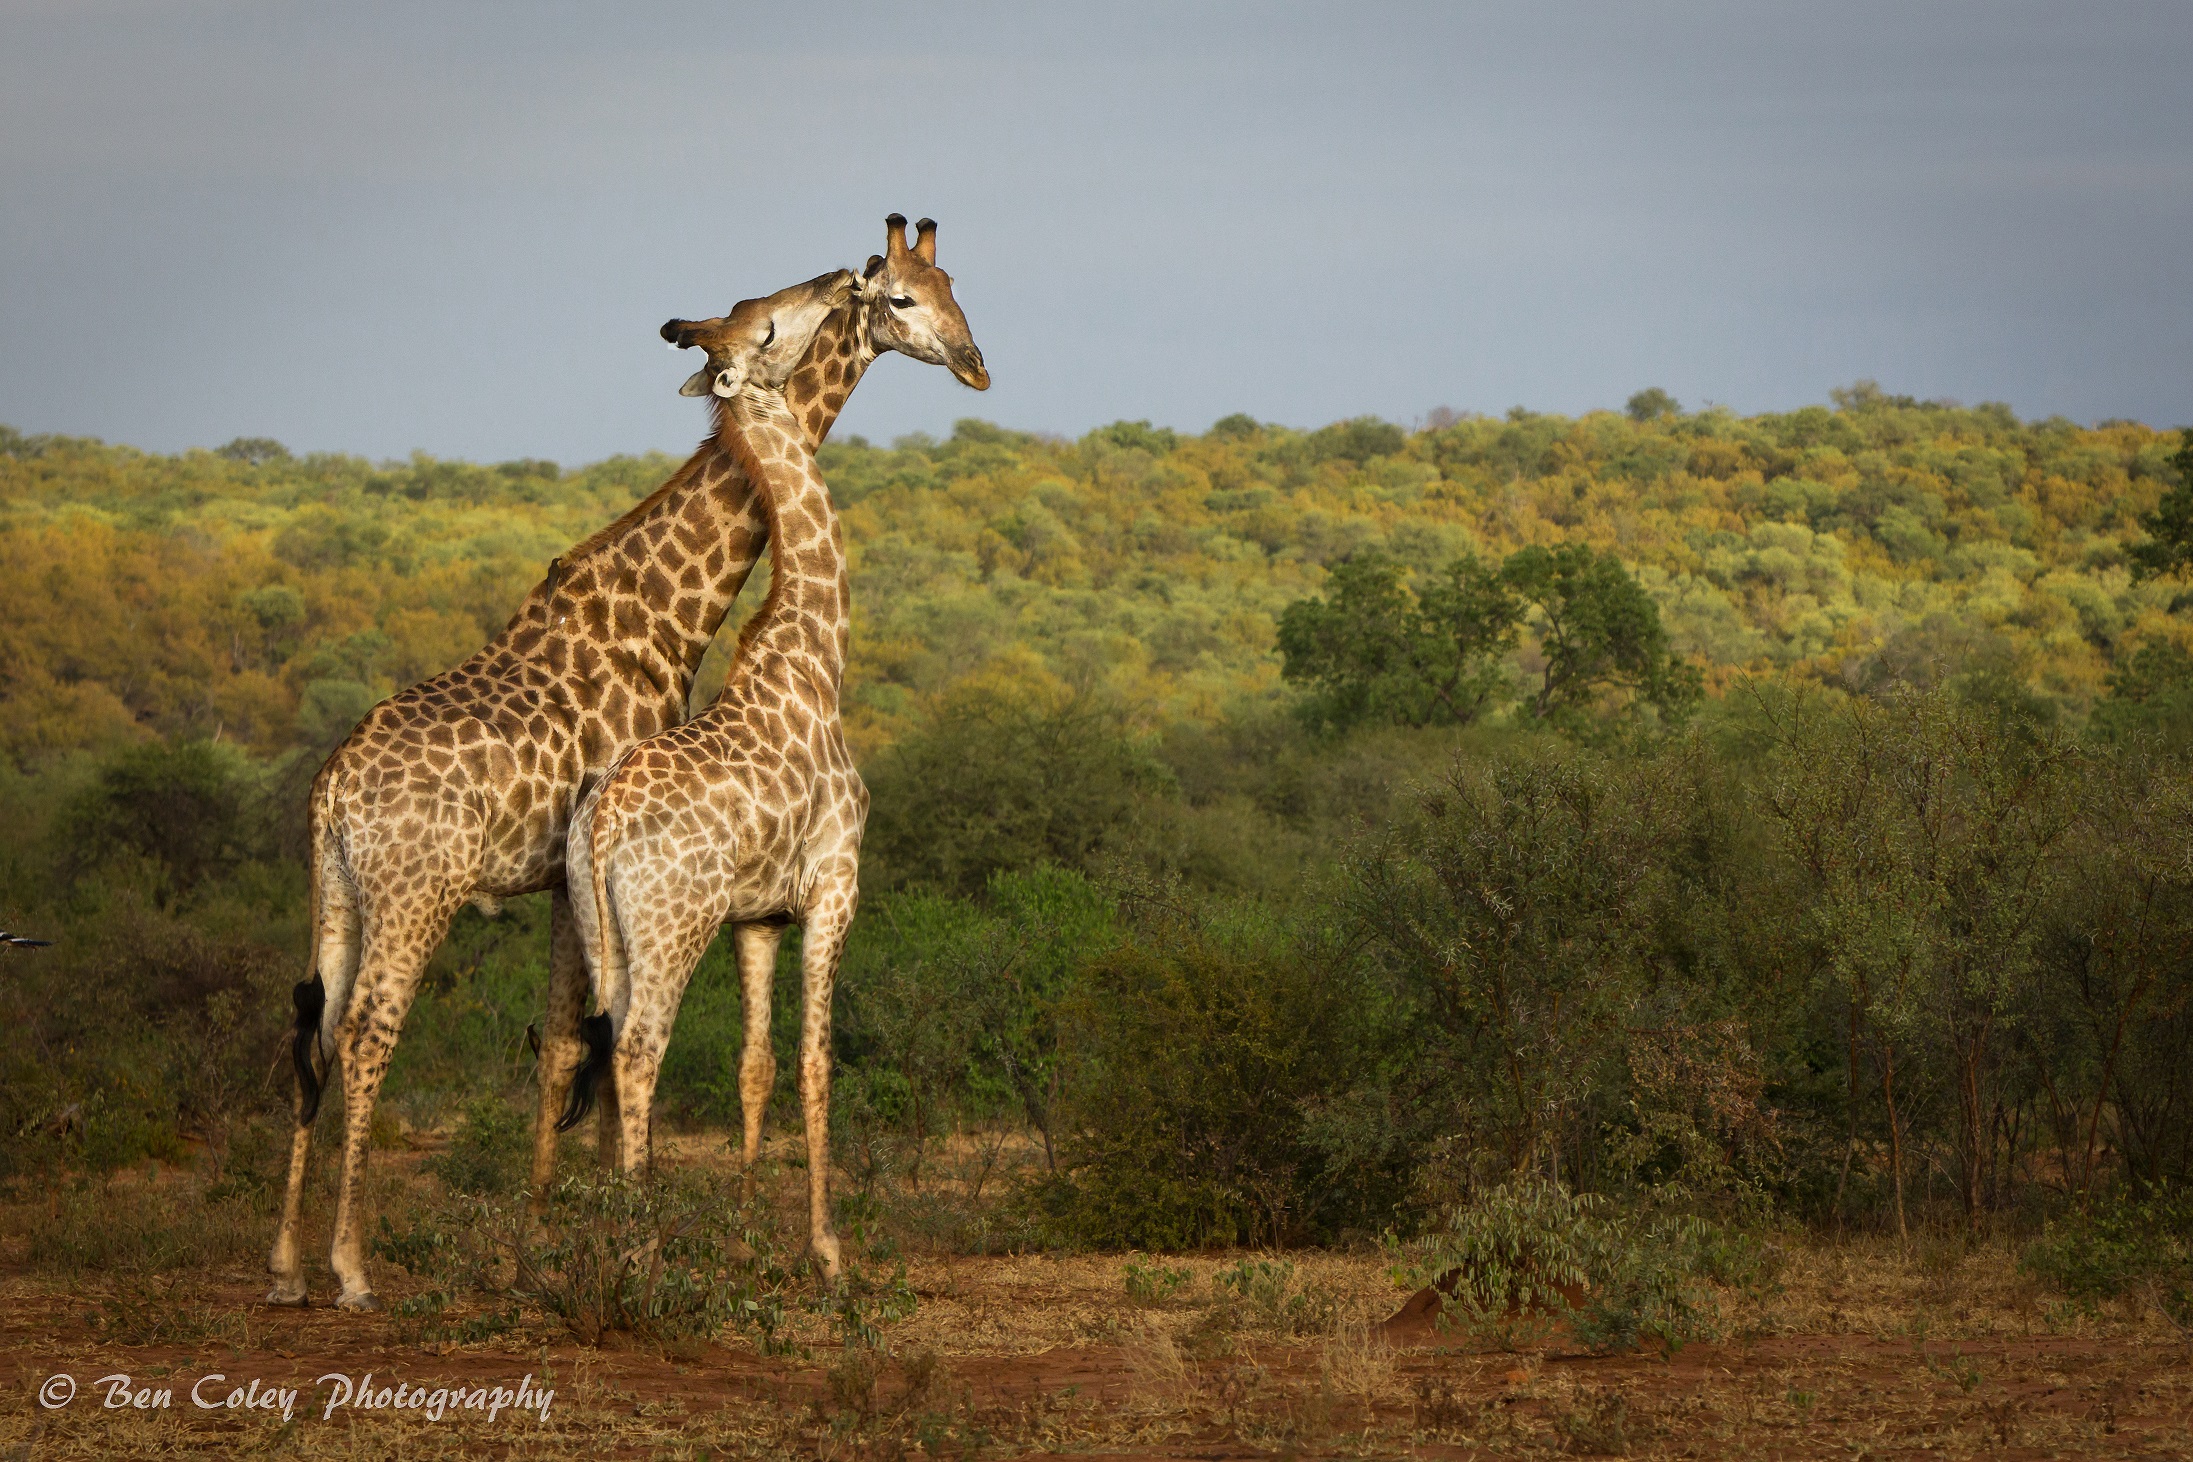 A pain in the neck for giraffes - Africa Geographic